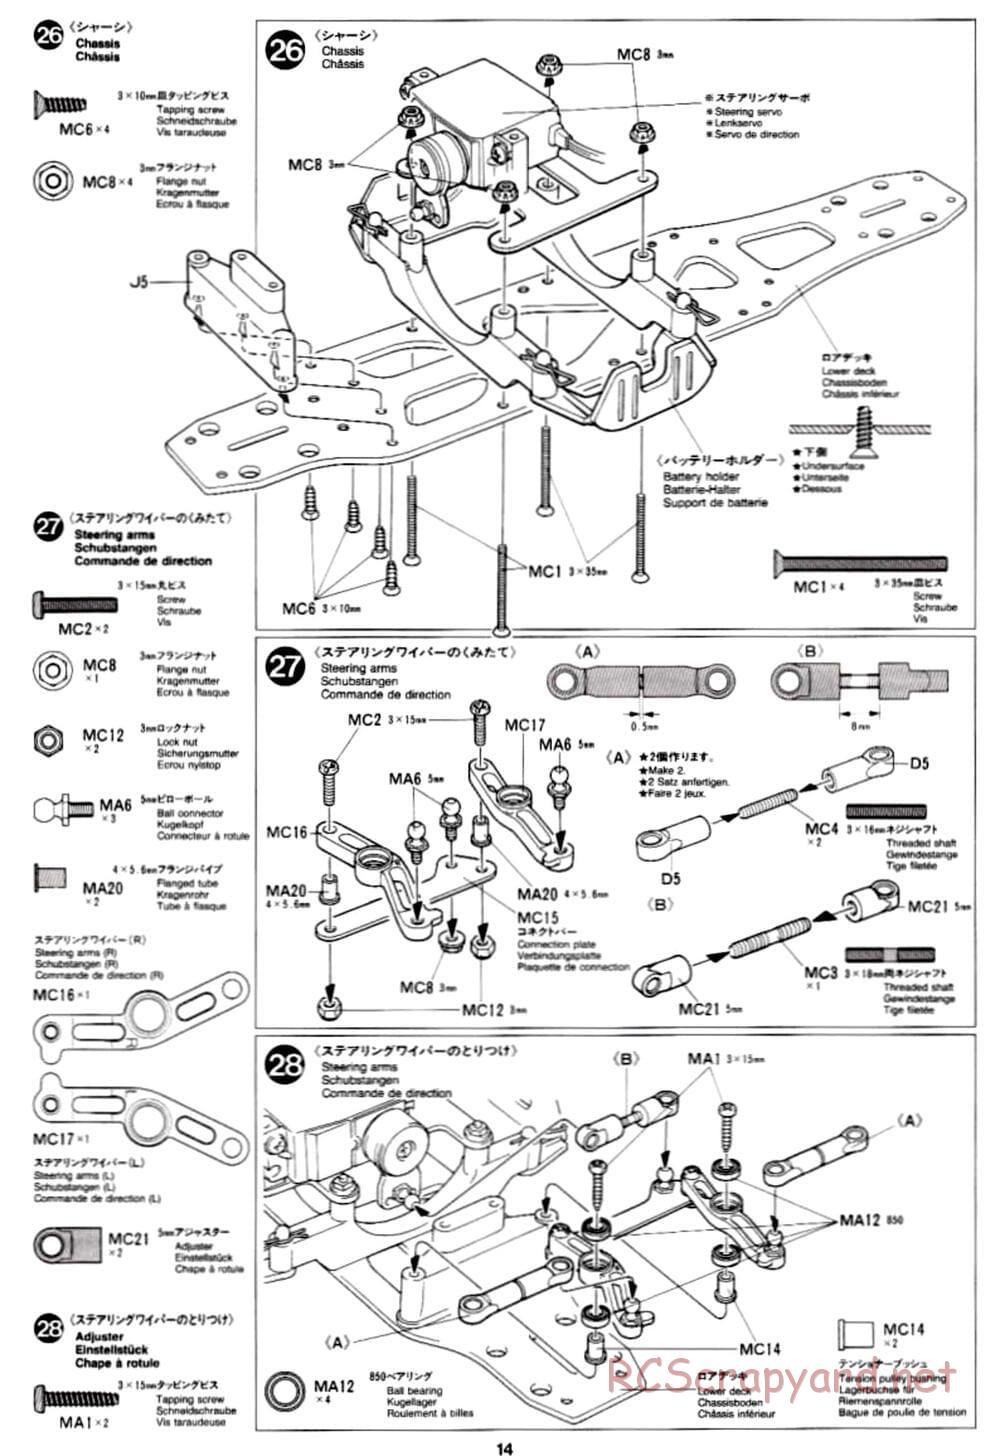 Tamiya - TA-03R TRF Special Edition Chassis - Manual - Page 14